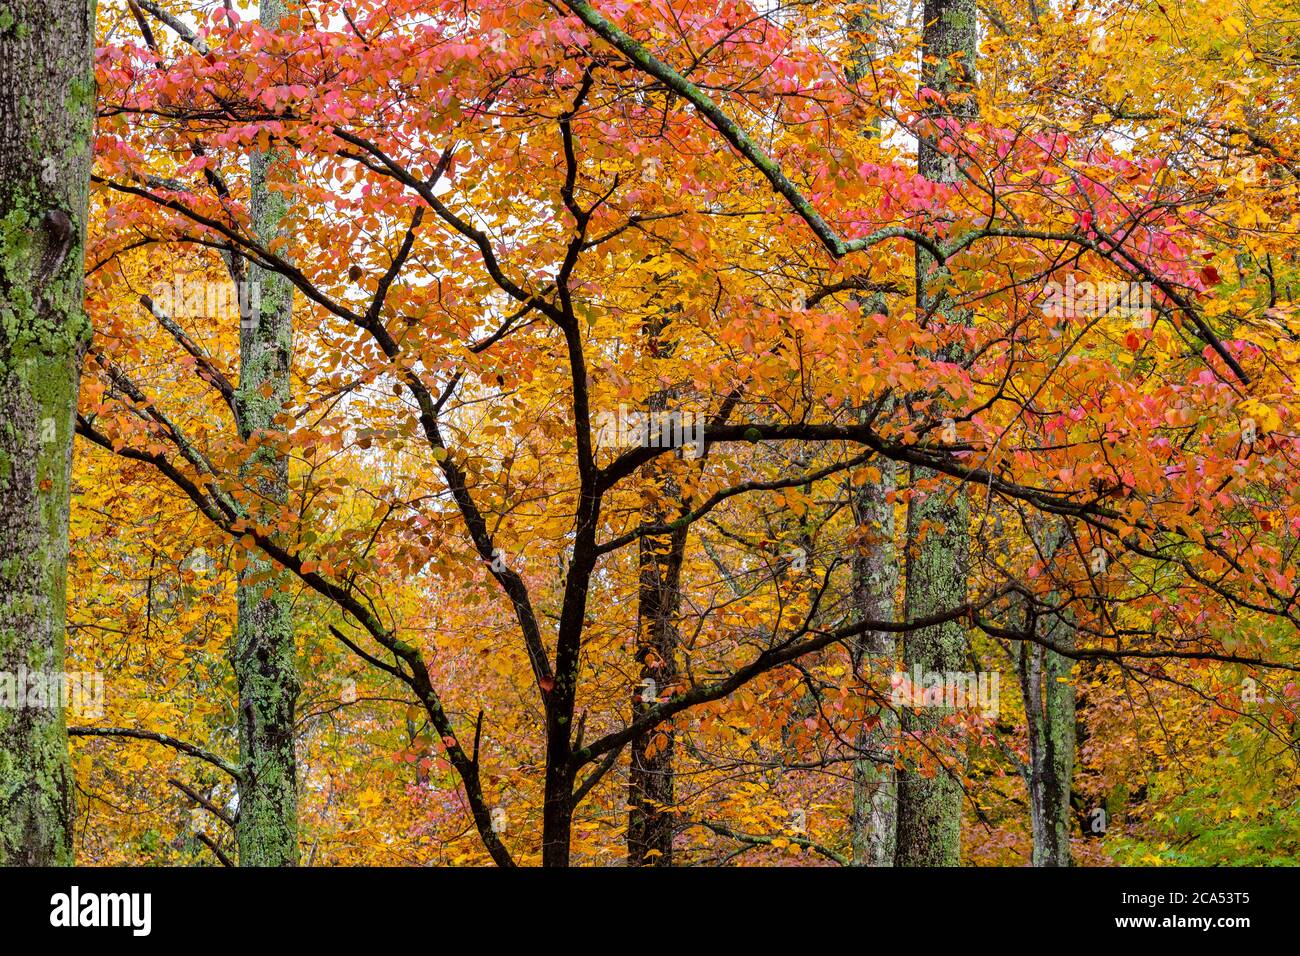 View of colorful leaves on trees, Saline County State Fish Wildlife Area, Saline Co., Illinois, USA Stock Photo